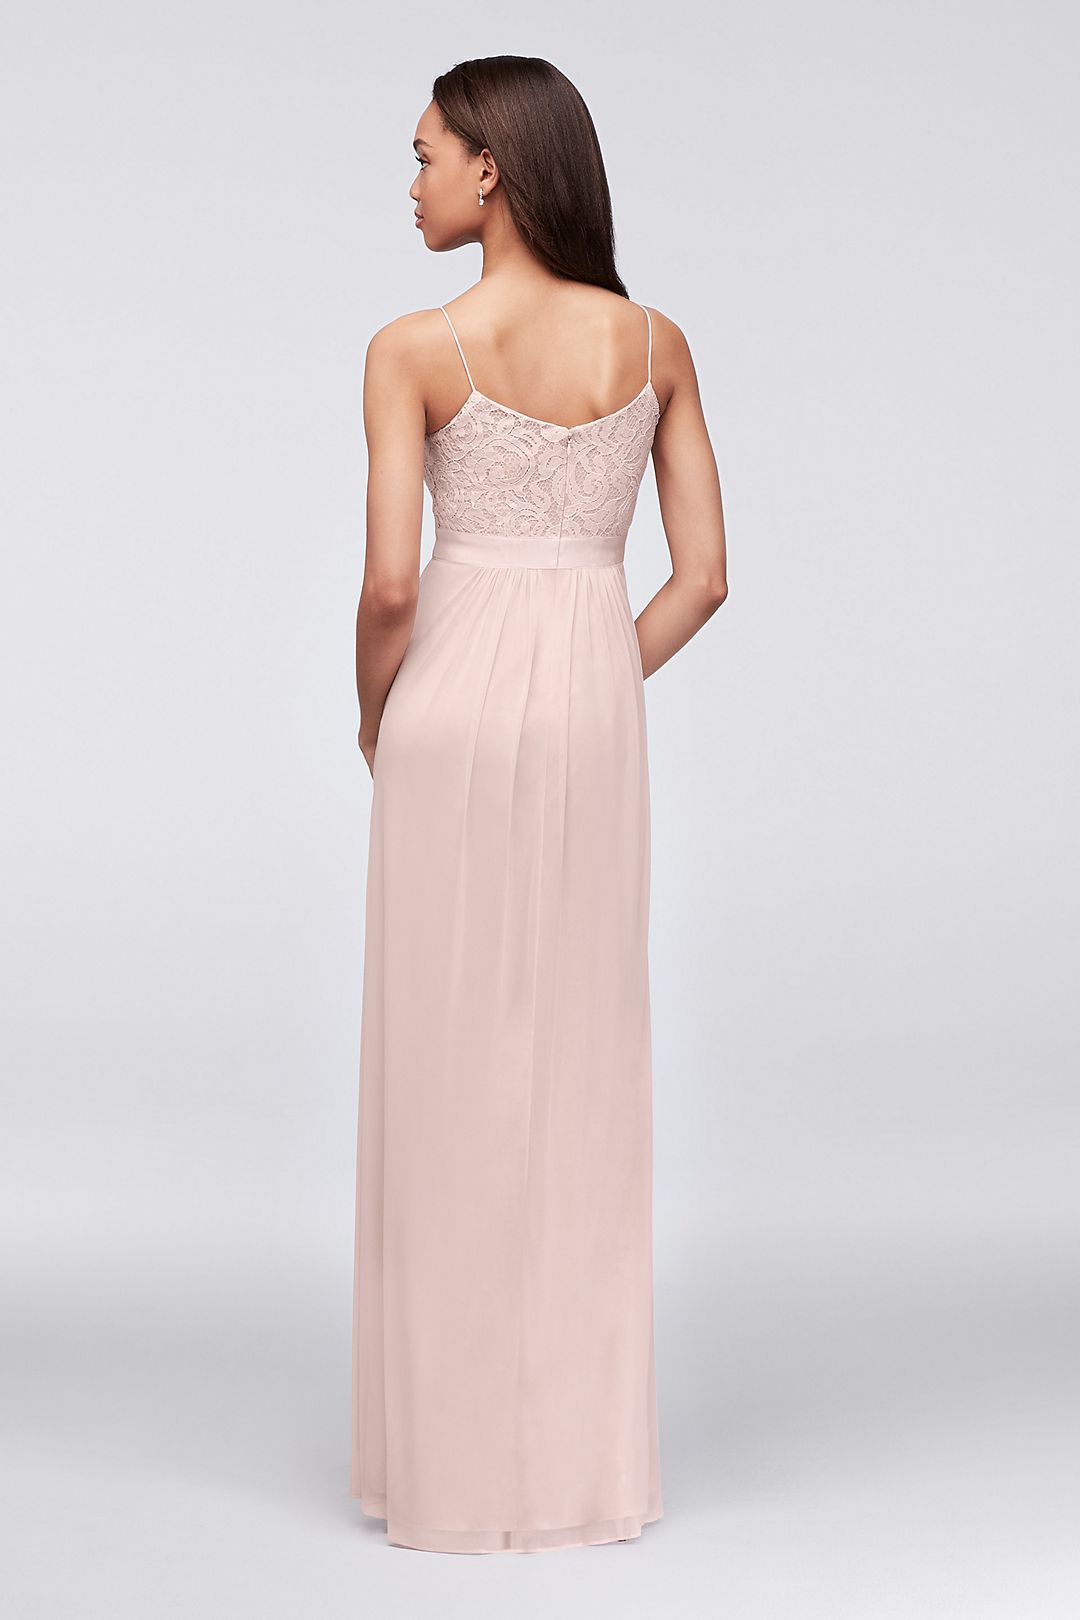 Lace and Cascading Mesh Bridesmaid Dress Image 2